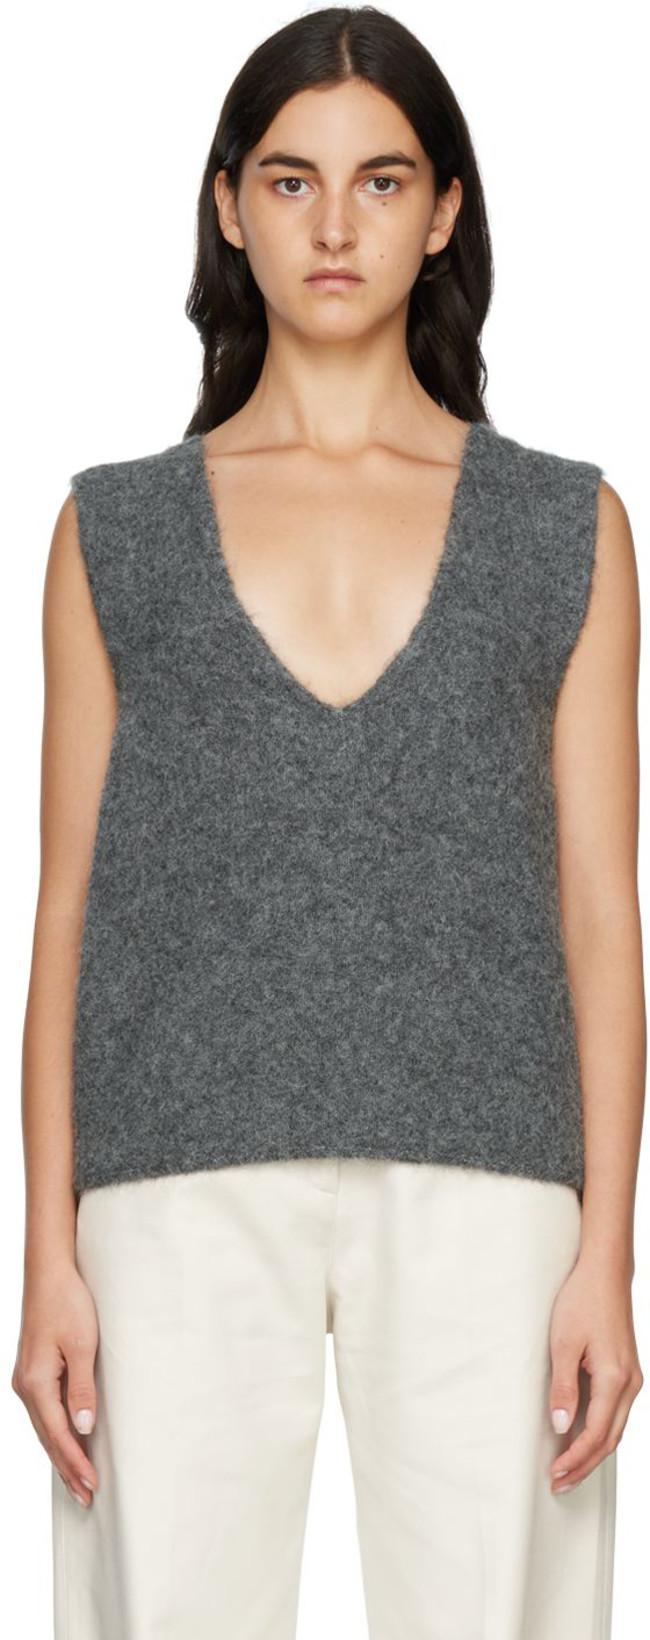 SSENSE Exclusive Gray Cropped Vest by ARCH THE